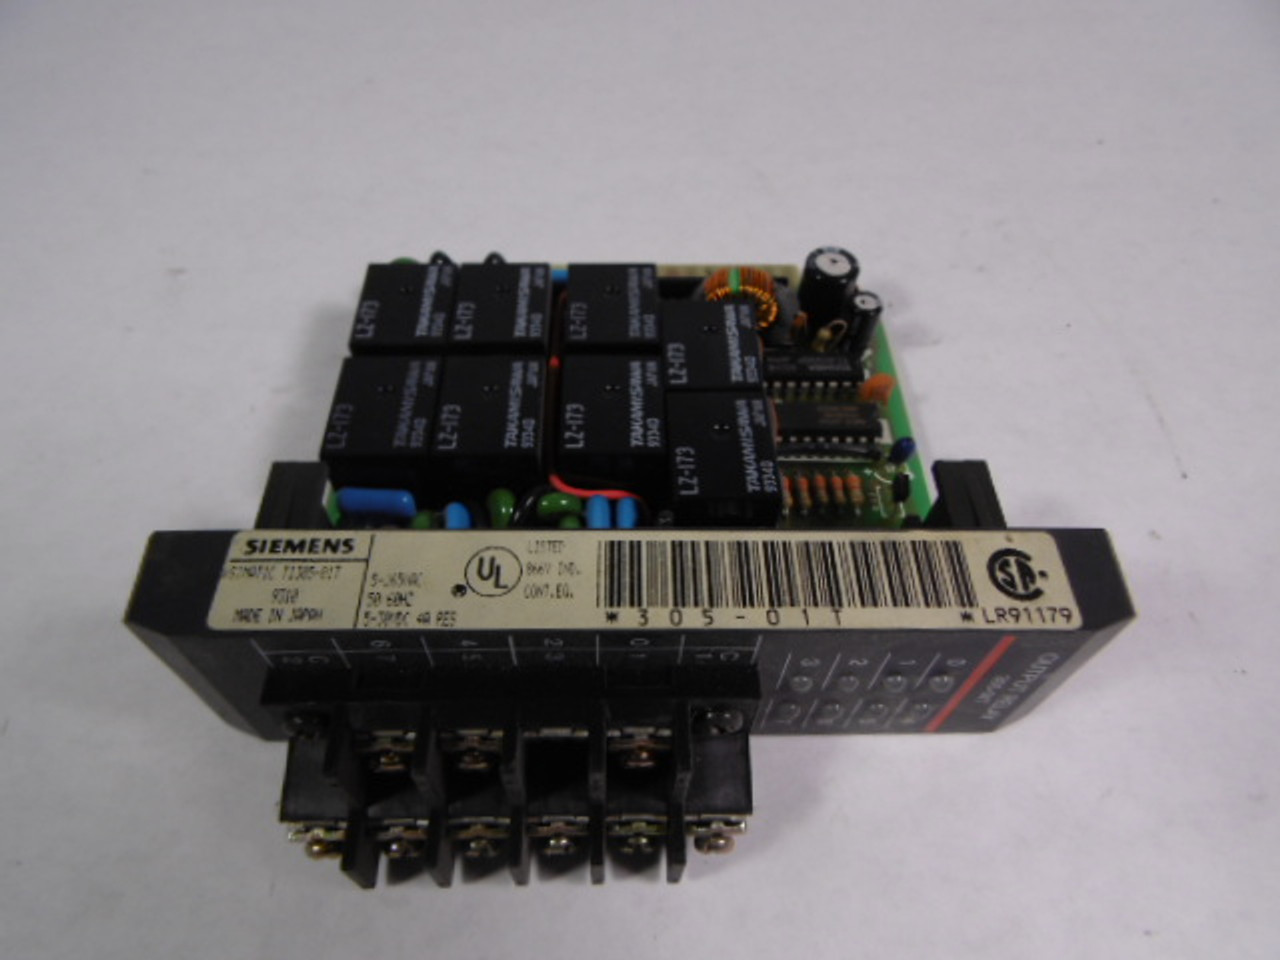 Siemens TI-305-01T Output Relay Module *Missing Screws & Terminal Cover* USED